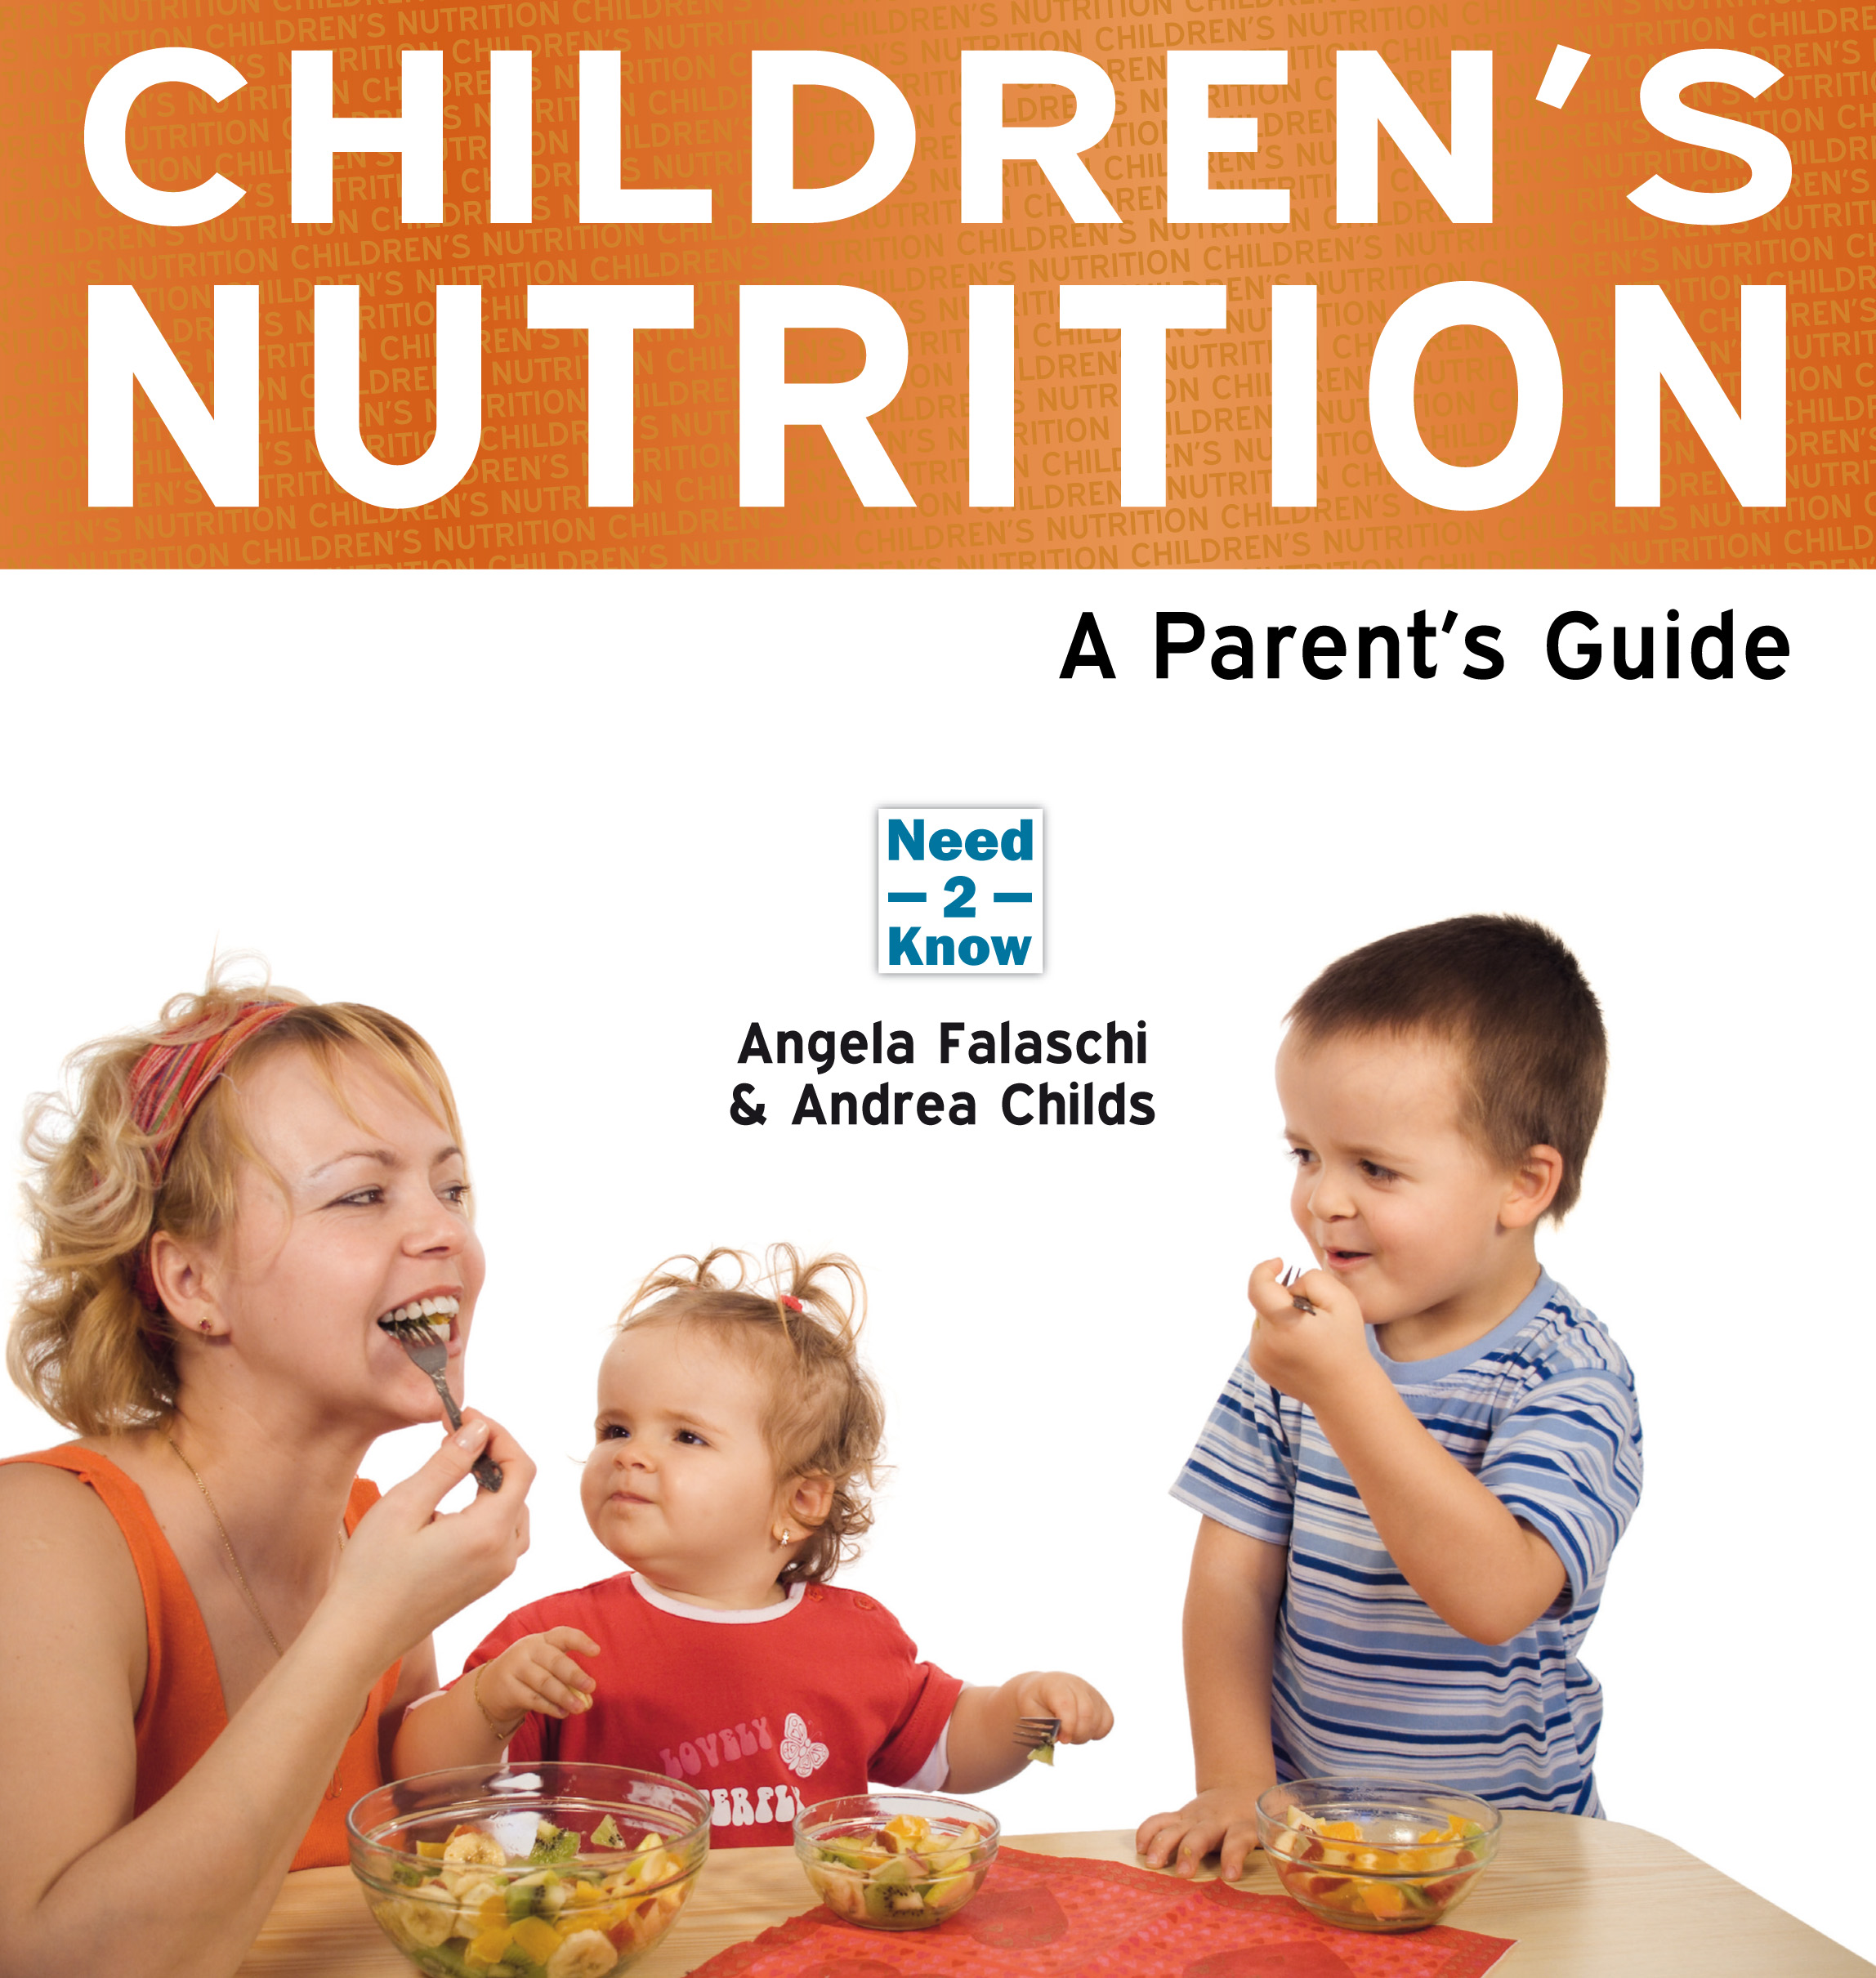 Healthy+eating+for+kids+books